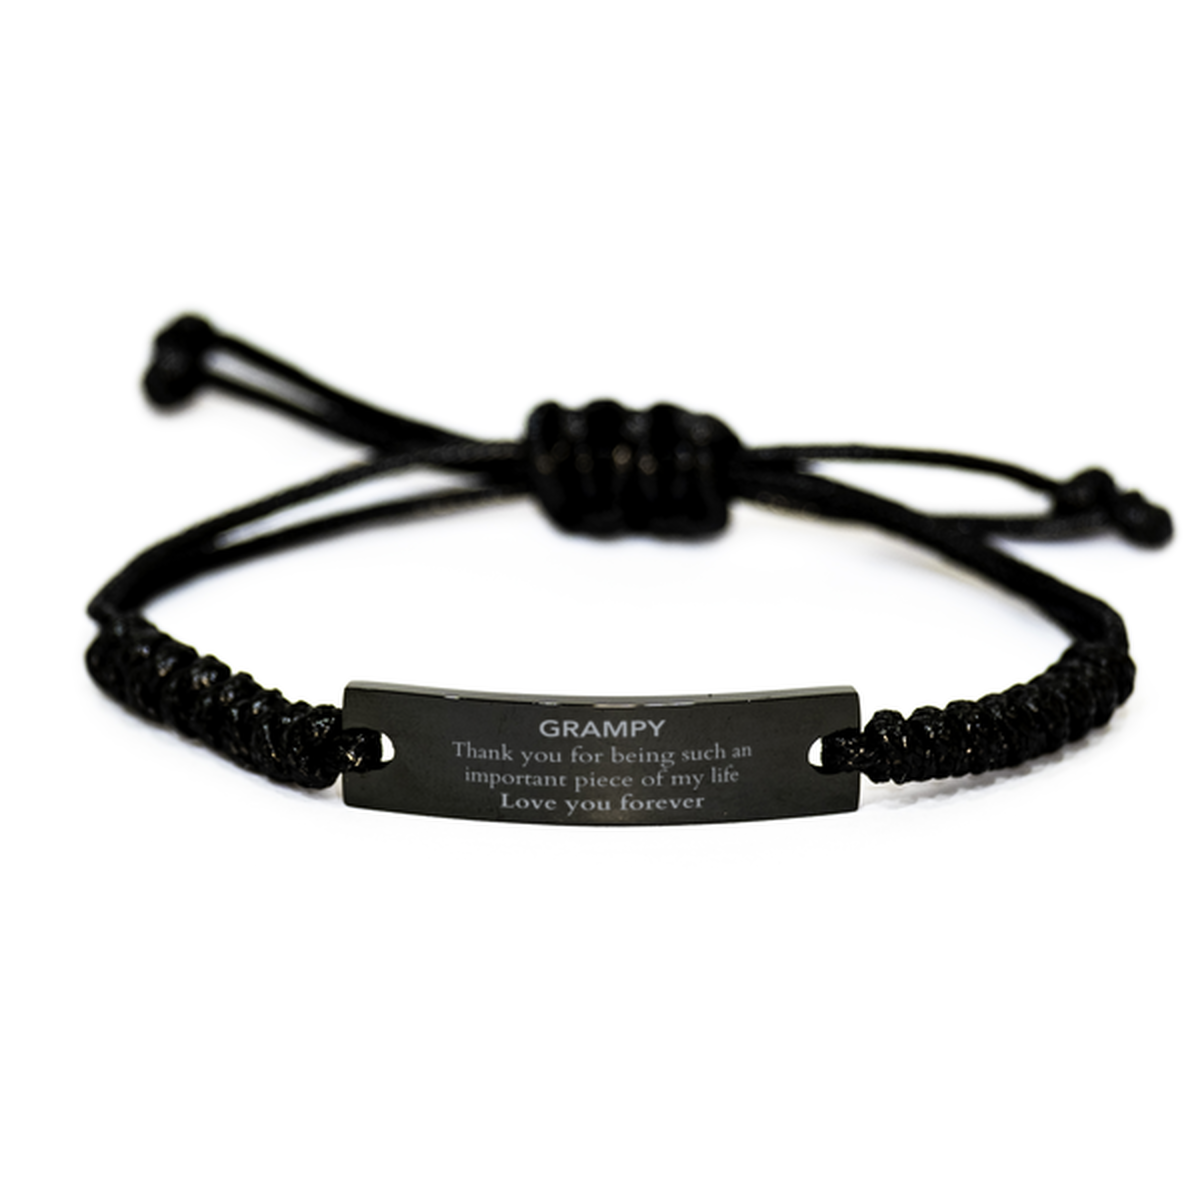 Appropriate Grampy Black Rope Bracelet Epic Birthday Gifts for Grampy Thank you for being such an important piece of my life Grampy Christmas Mothers Fathers Day